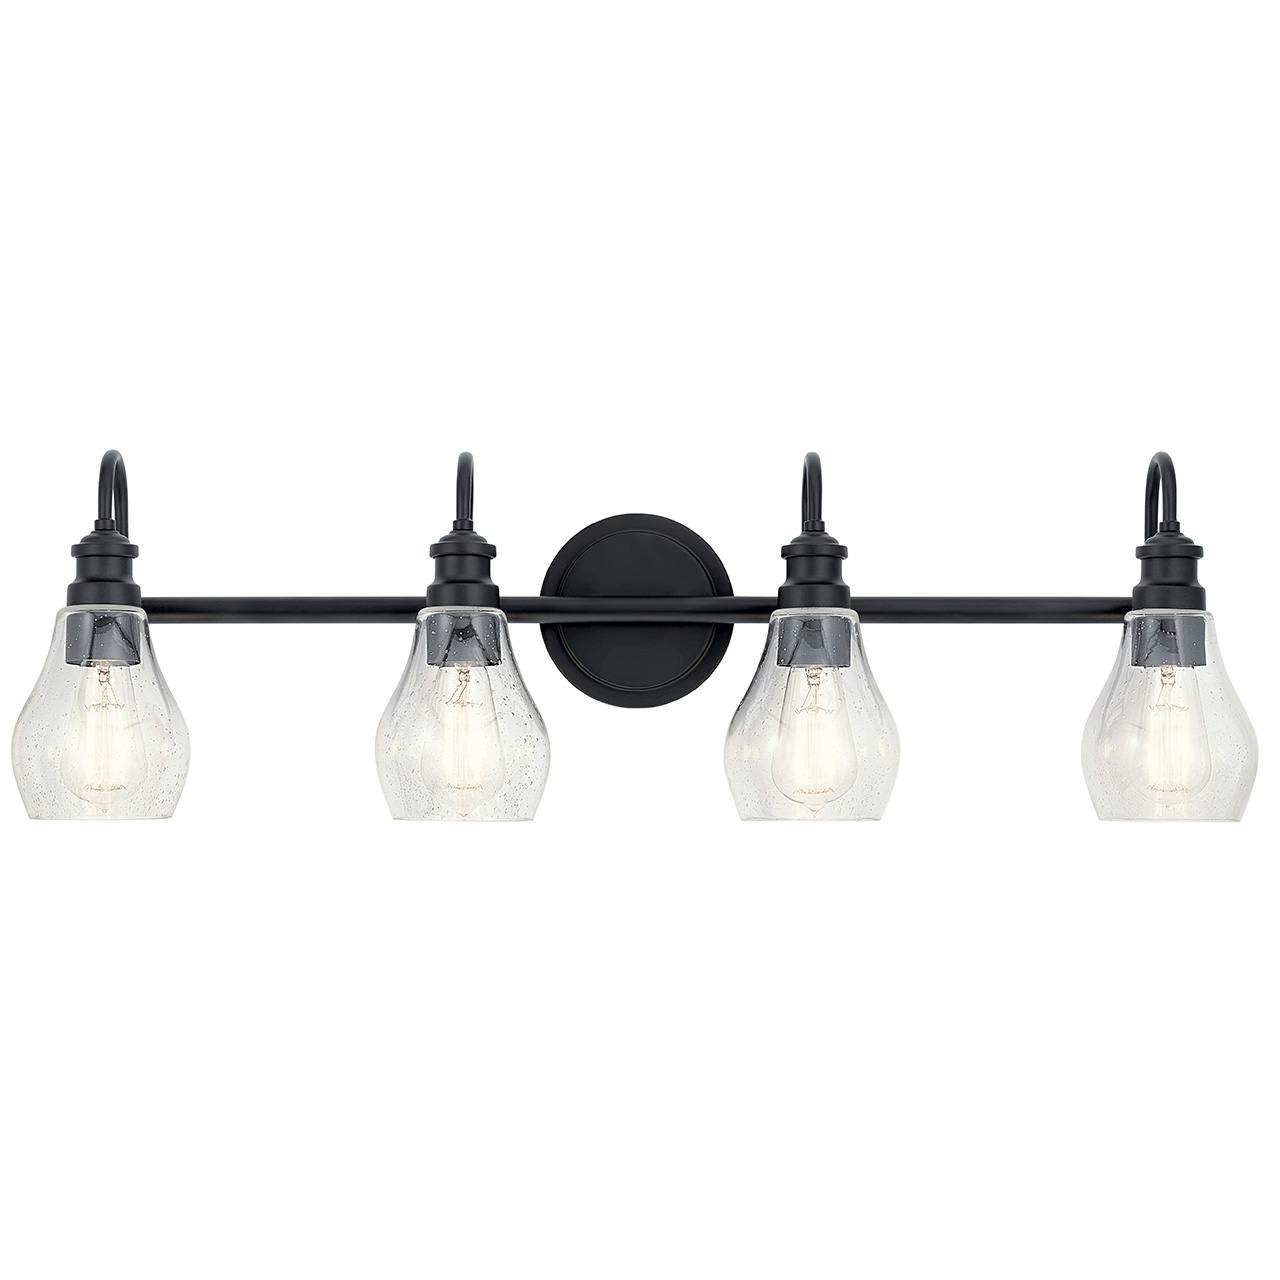 The Greenbrier™ 4 Light Vanity Light Black facing down on a white background